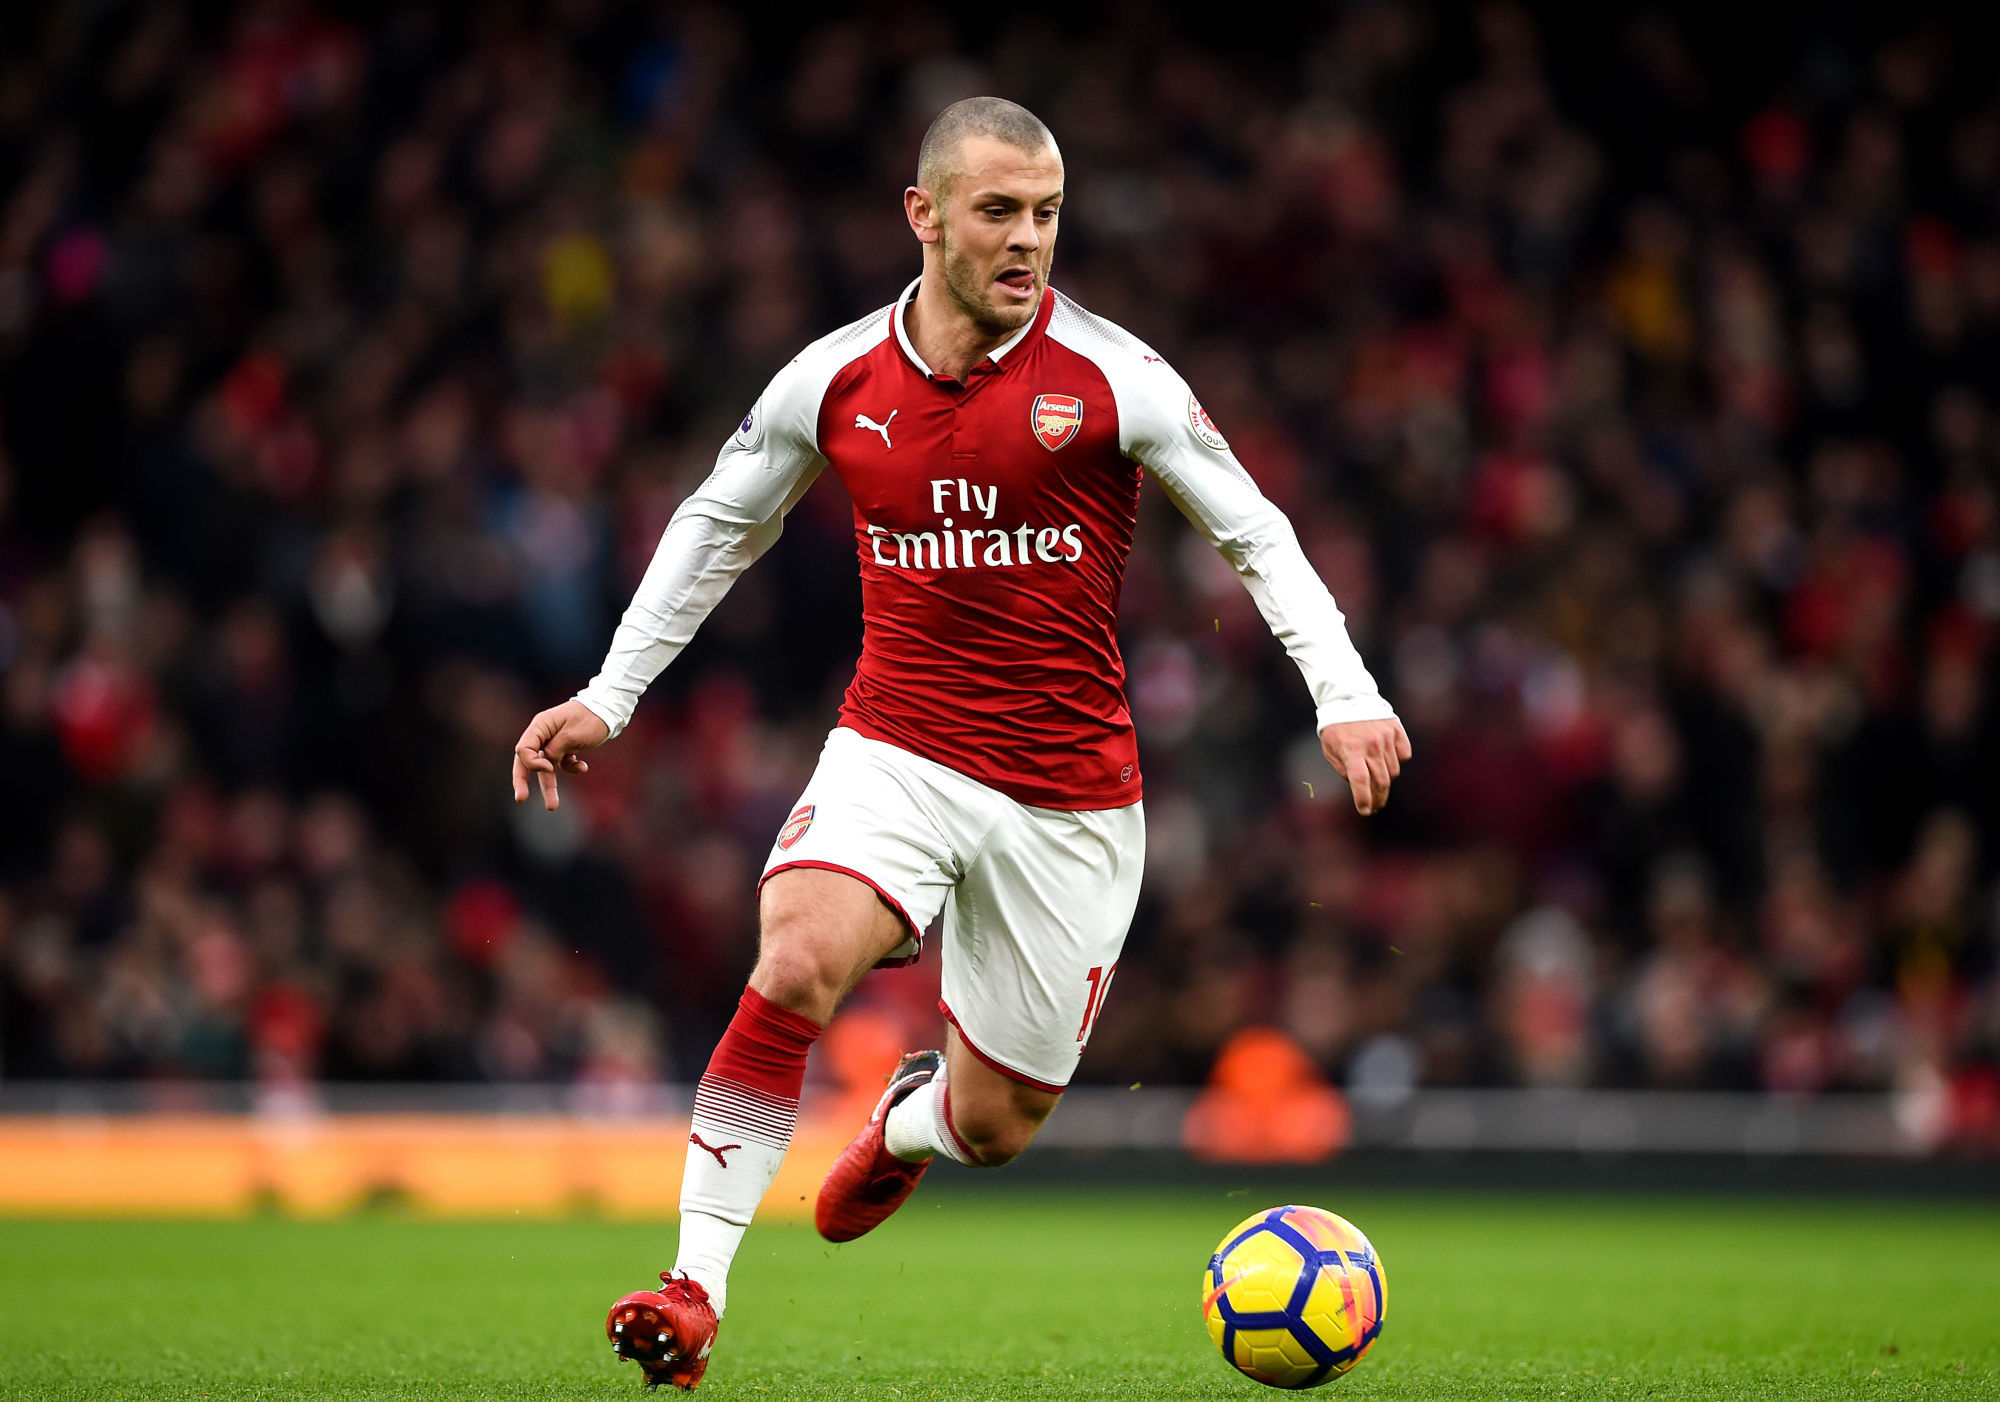 Jack Wilshere Photo : PA Images / Icon Sport